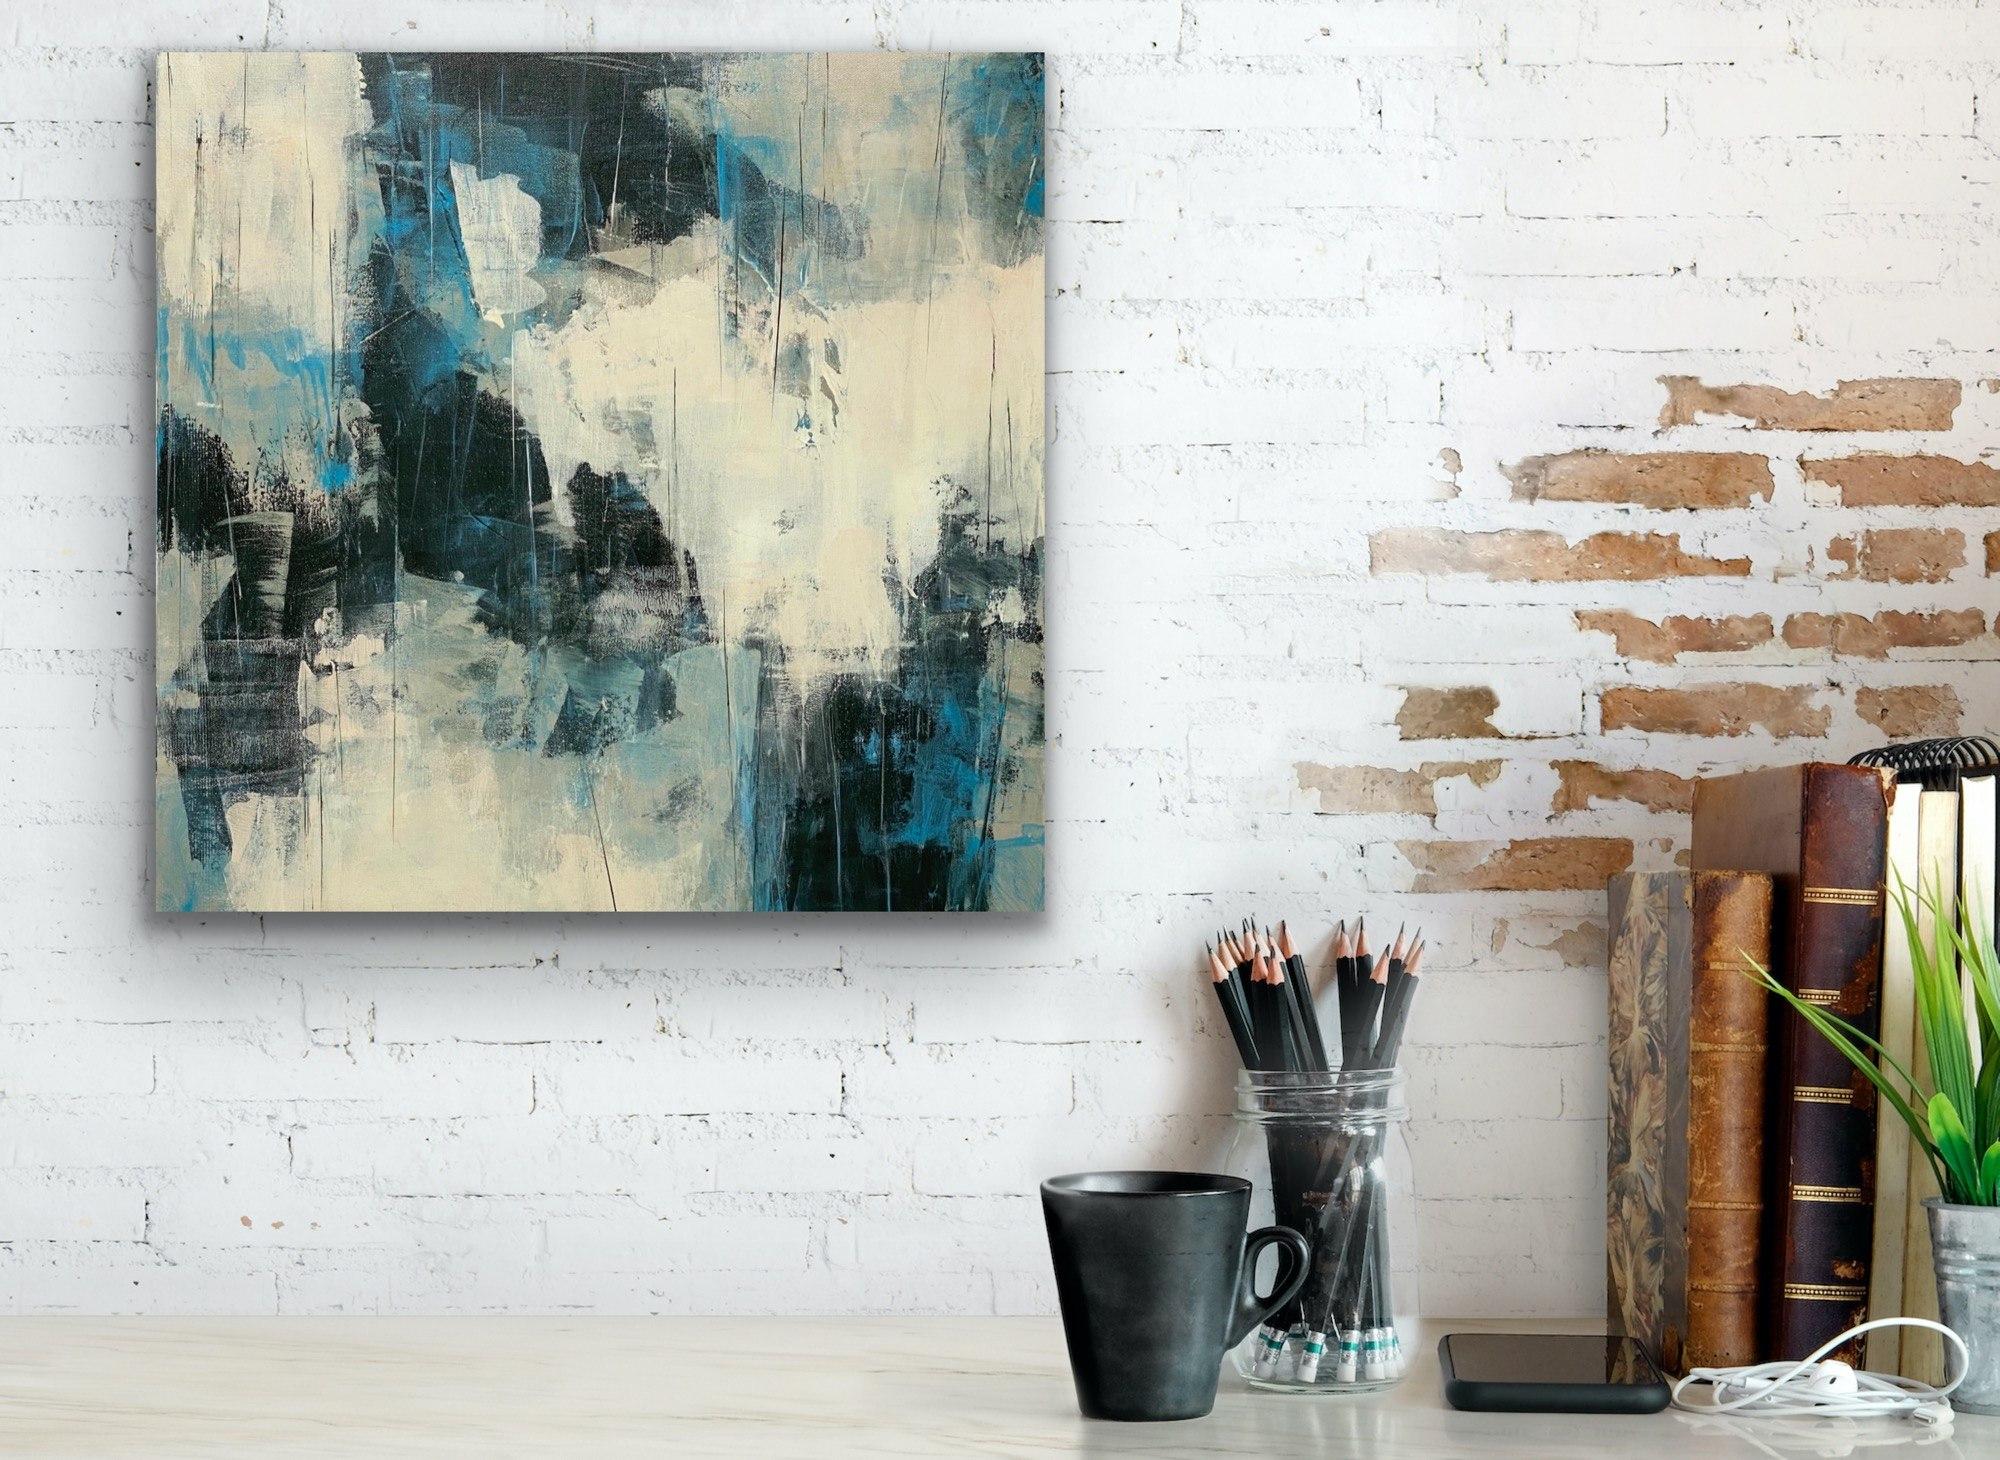 Cutting Edge, blue, black, white, gray, abstract expressionism - Gray Abstract Painting by Juanita Bellavance 